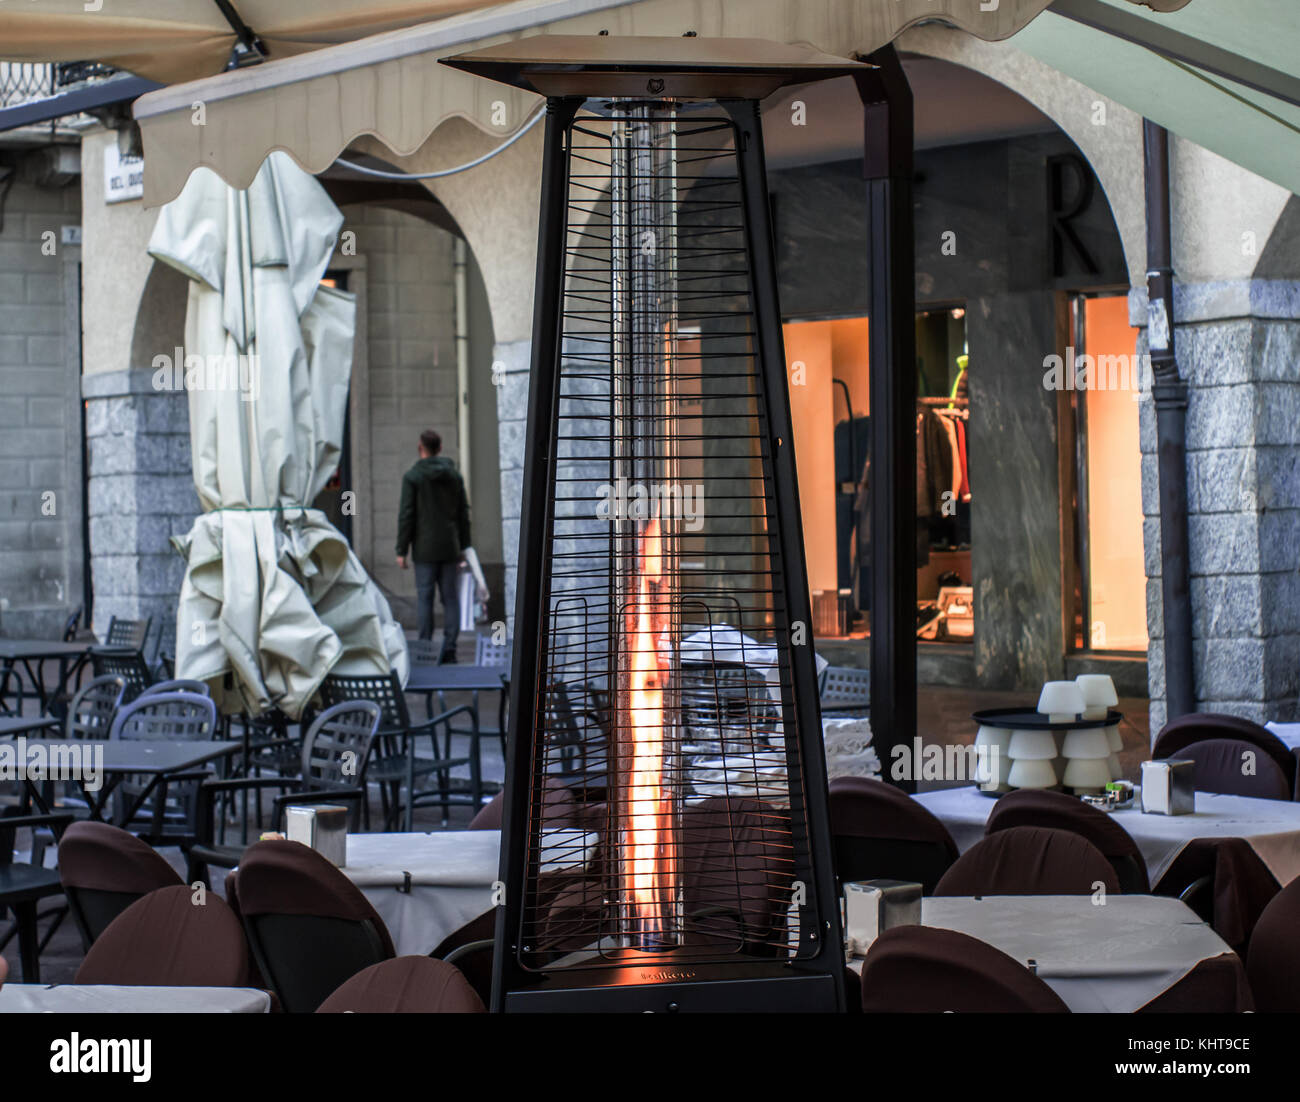 heating lamp placed among the tables of an open cafe Stock Photo